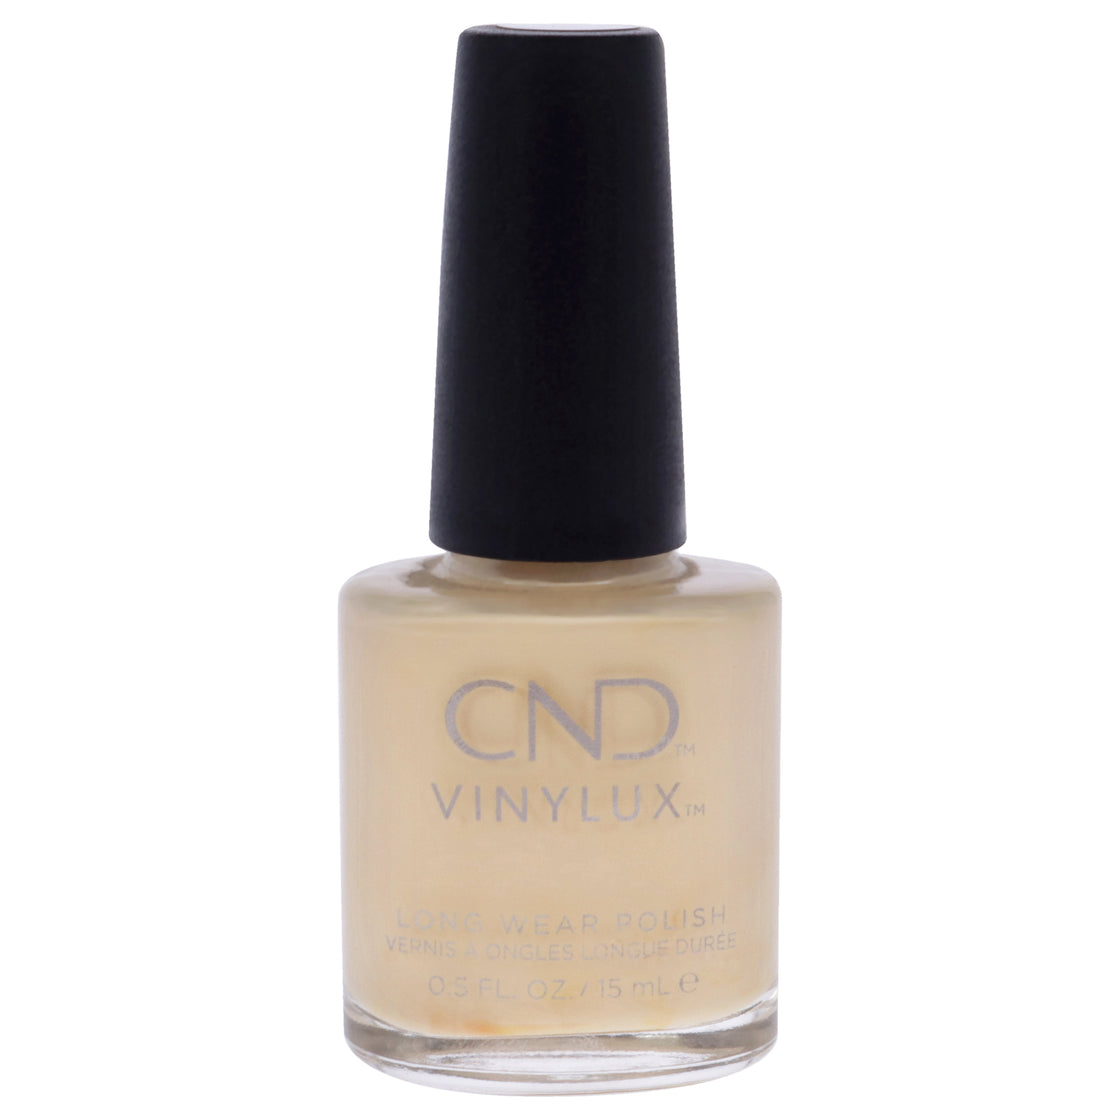 Vinylux Long Wear Polish - 308 Exquisite by CND for Women - 0.5 oz Nail Polish